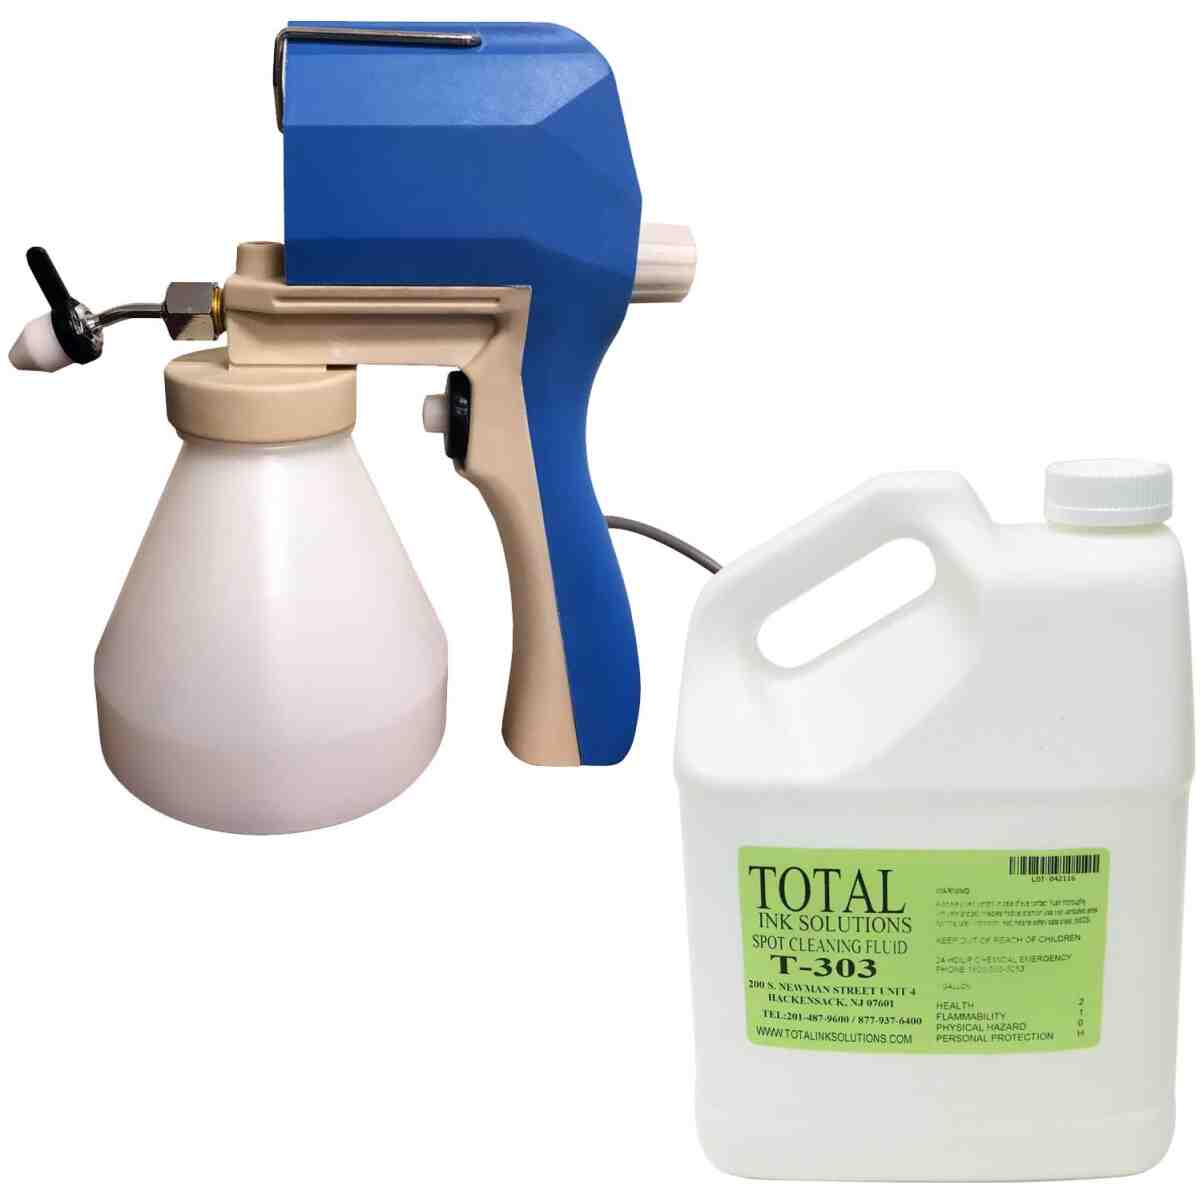 Spot Cleaning Gun SP750 Kit TOTAL INK SOLUTIONS®